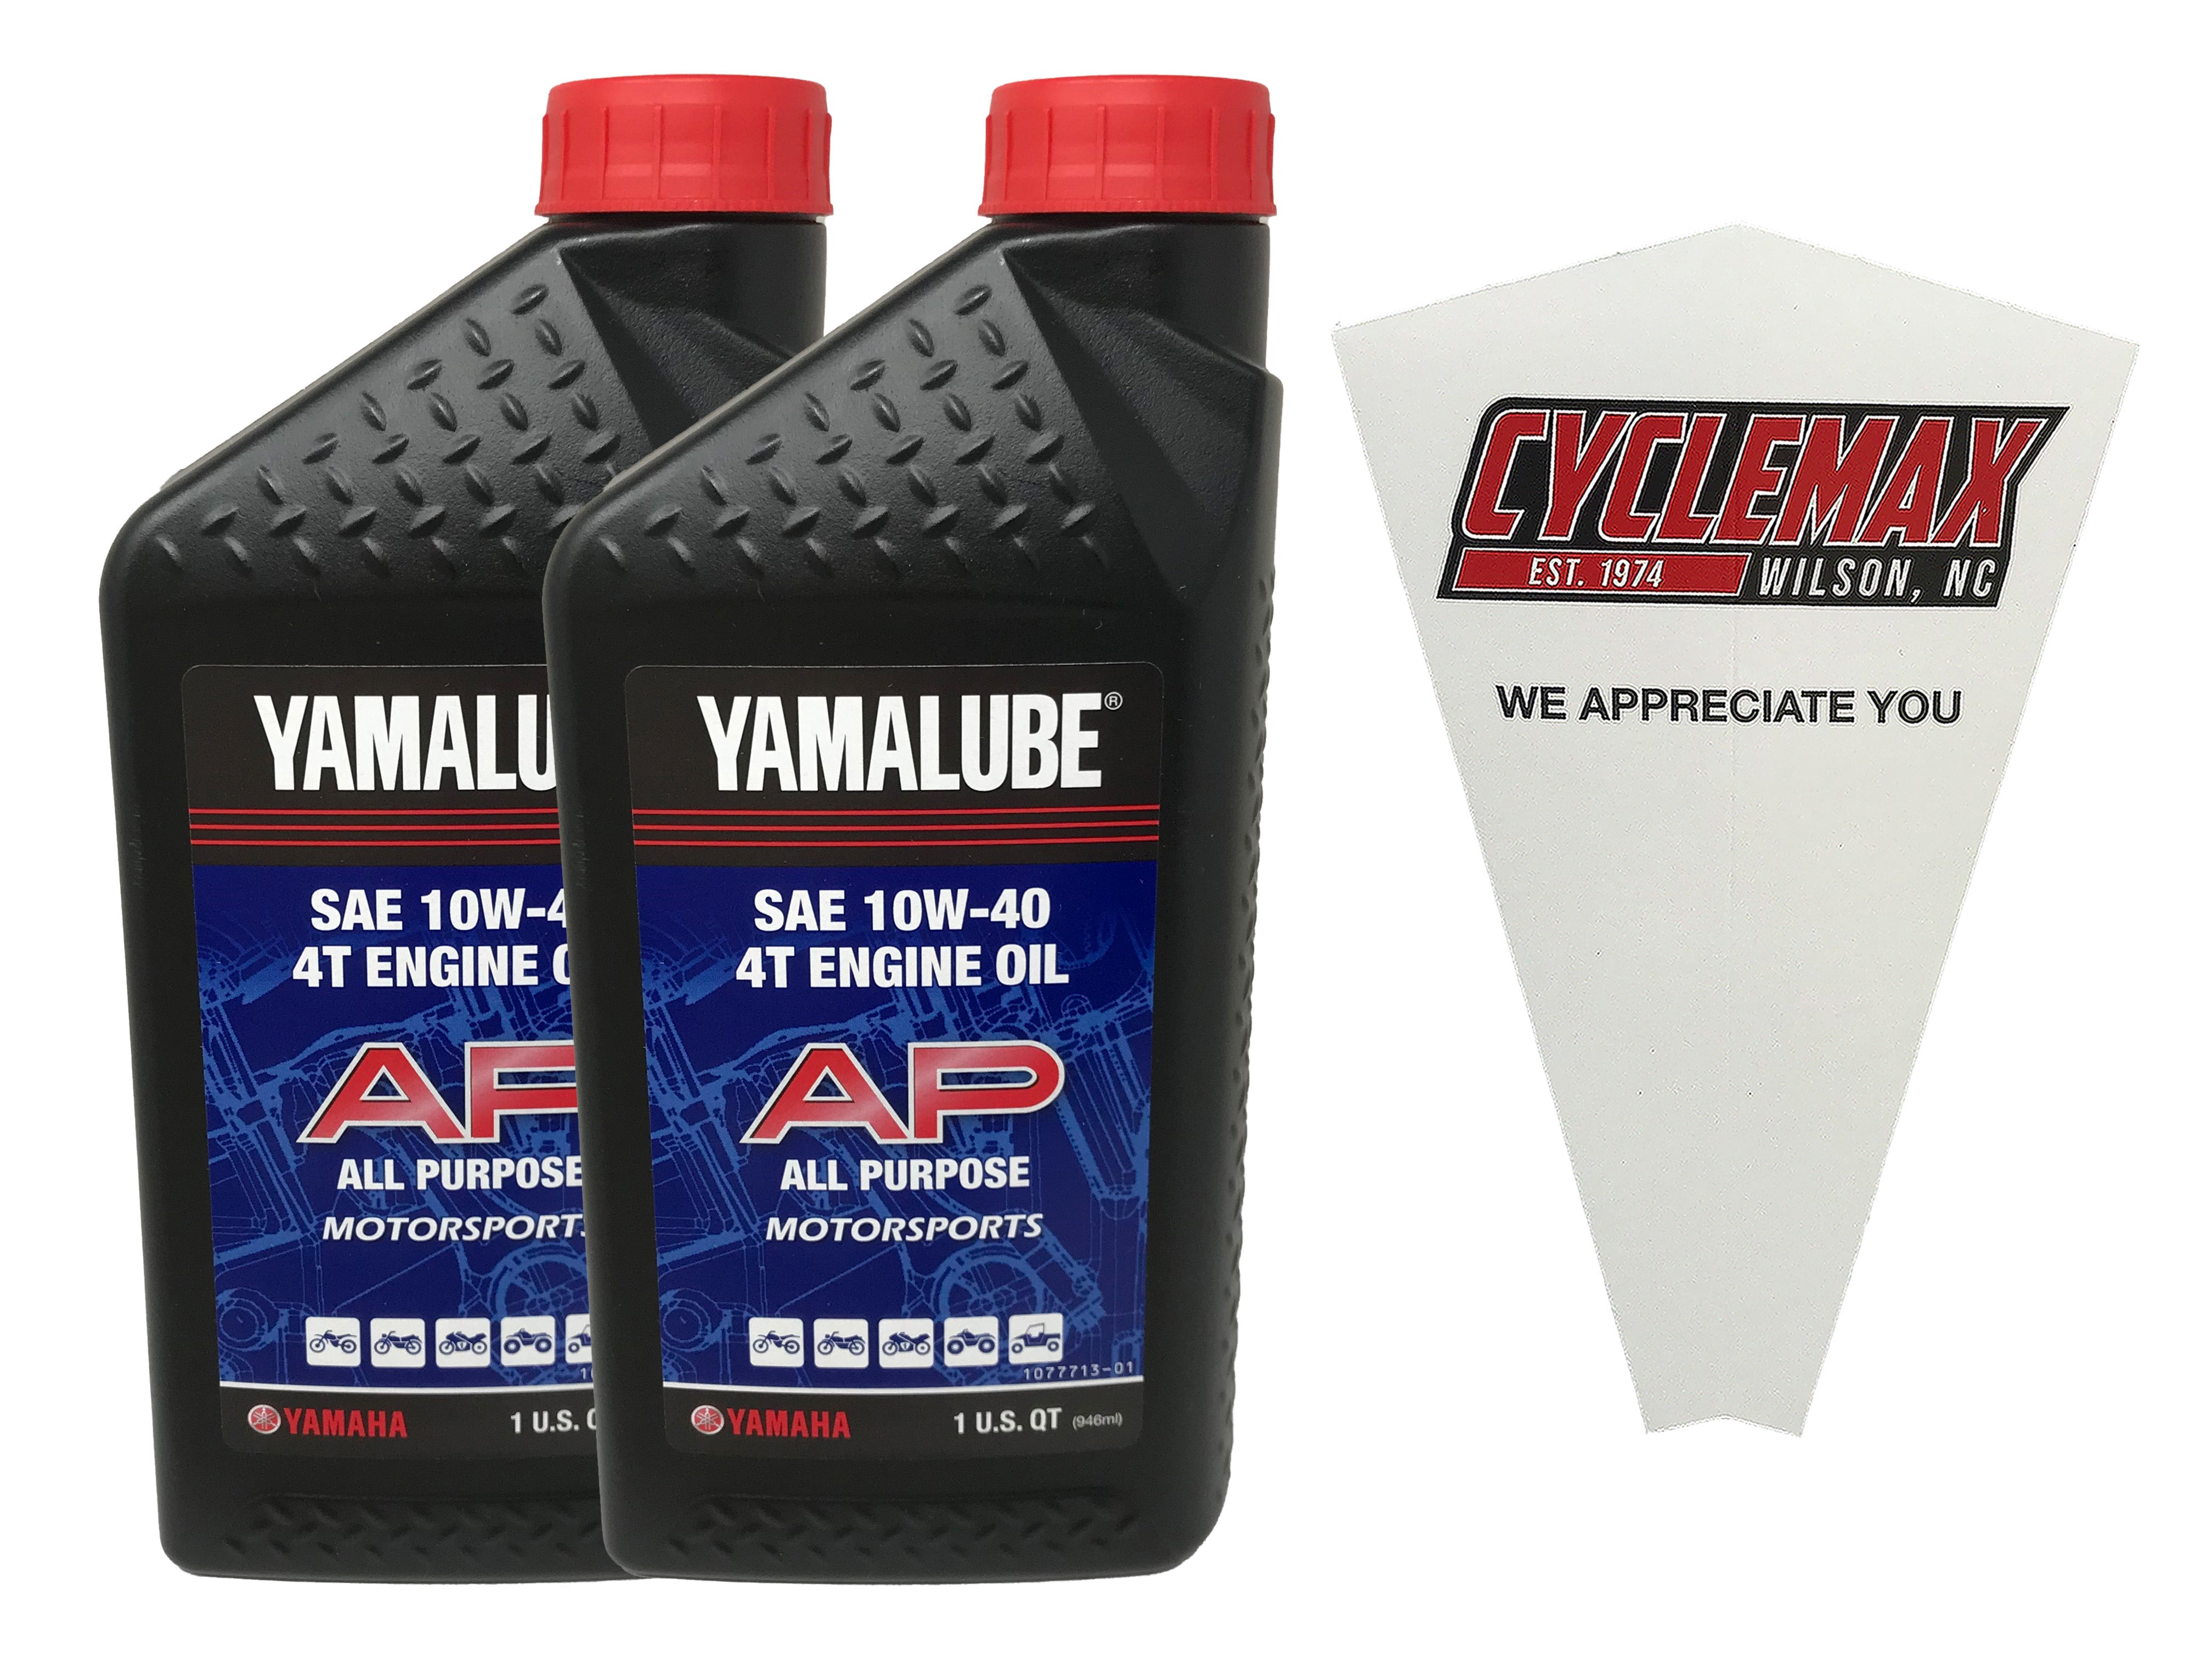 Cyclemax Two Pack of Yamaha Yamalube SAE 10W-40 4-Stroke Engine Oil LUB-10W-40-AP-12 Contains Two Quarts and a Funnel